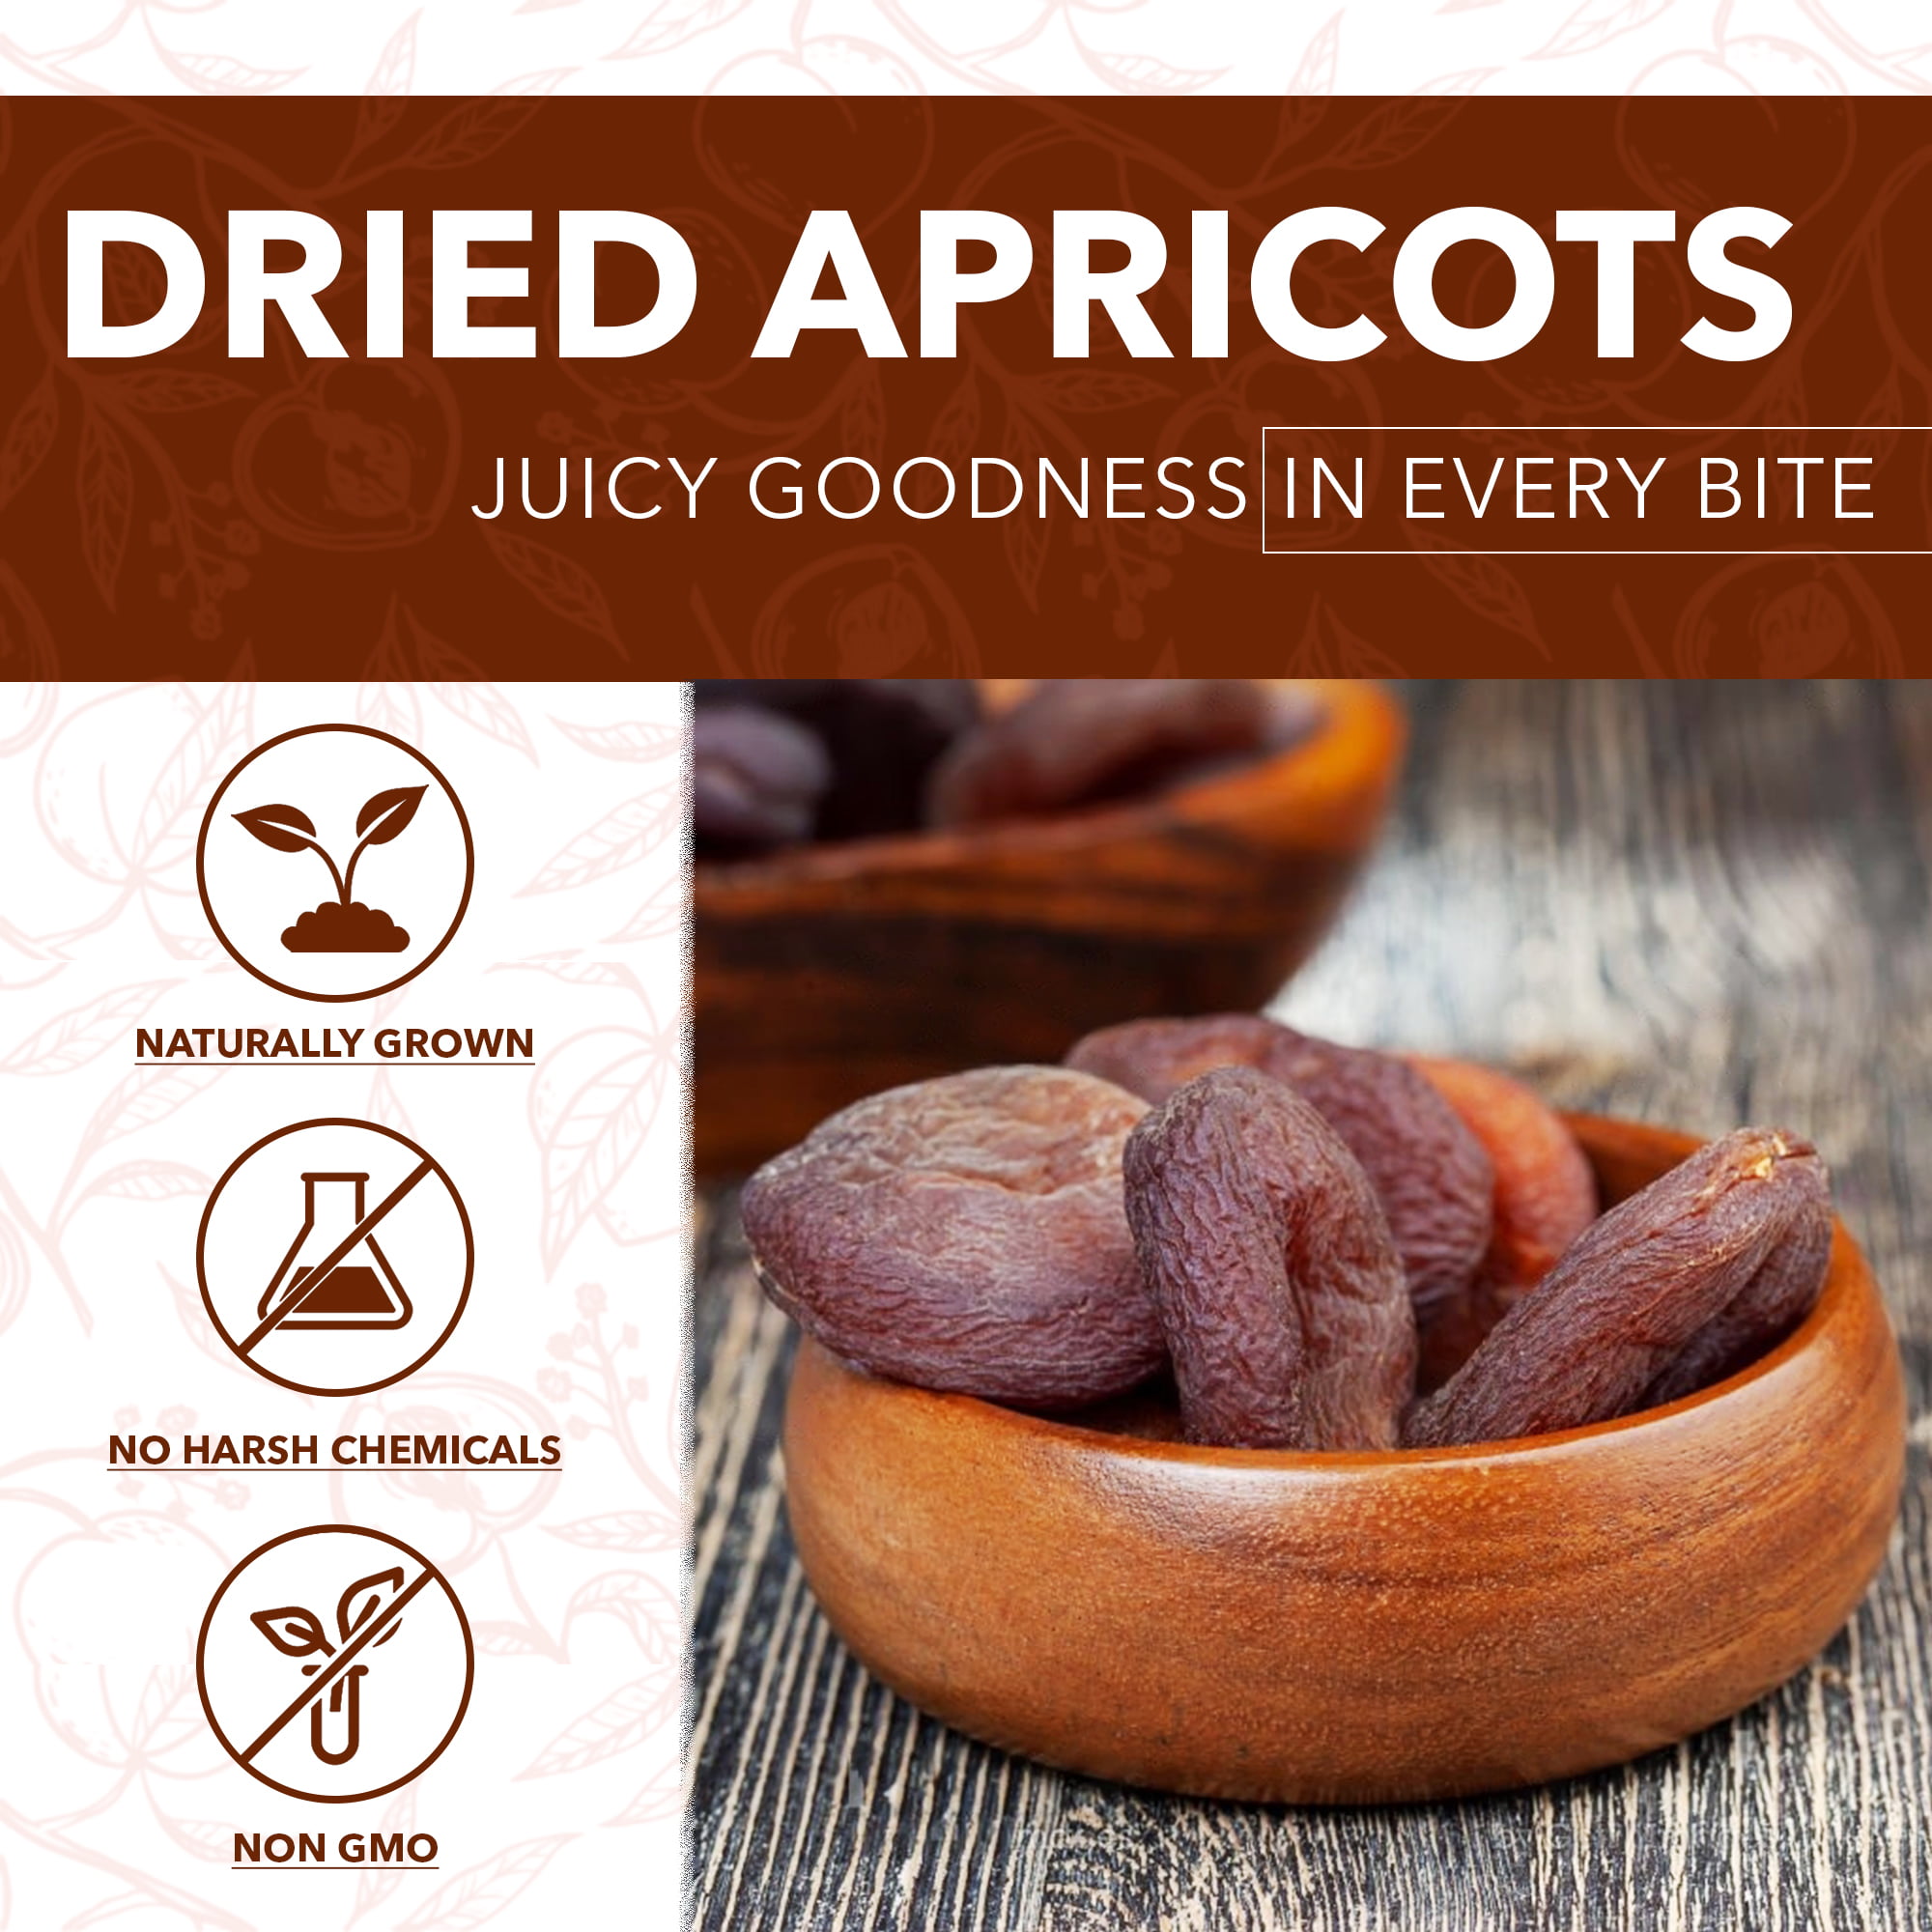  NUTS U.S. – Dried Apricots, Jumbo Size Turkish Apricots, No  Added Sugar & Color, Chewy and Juicy Texture, Non-GMO and No Added Flavor